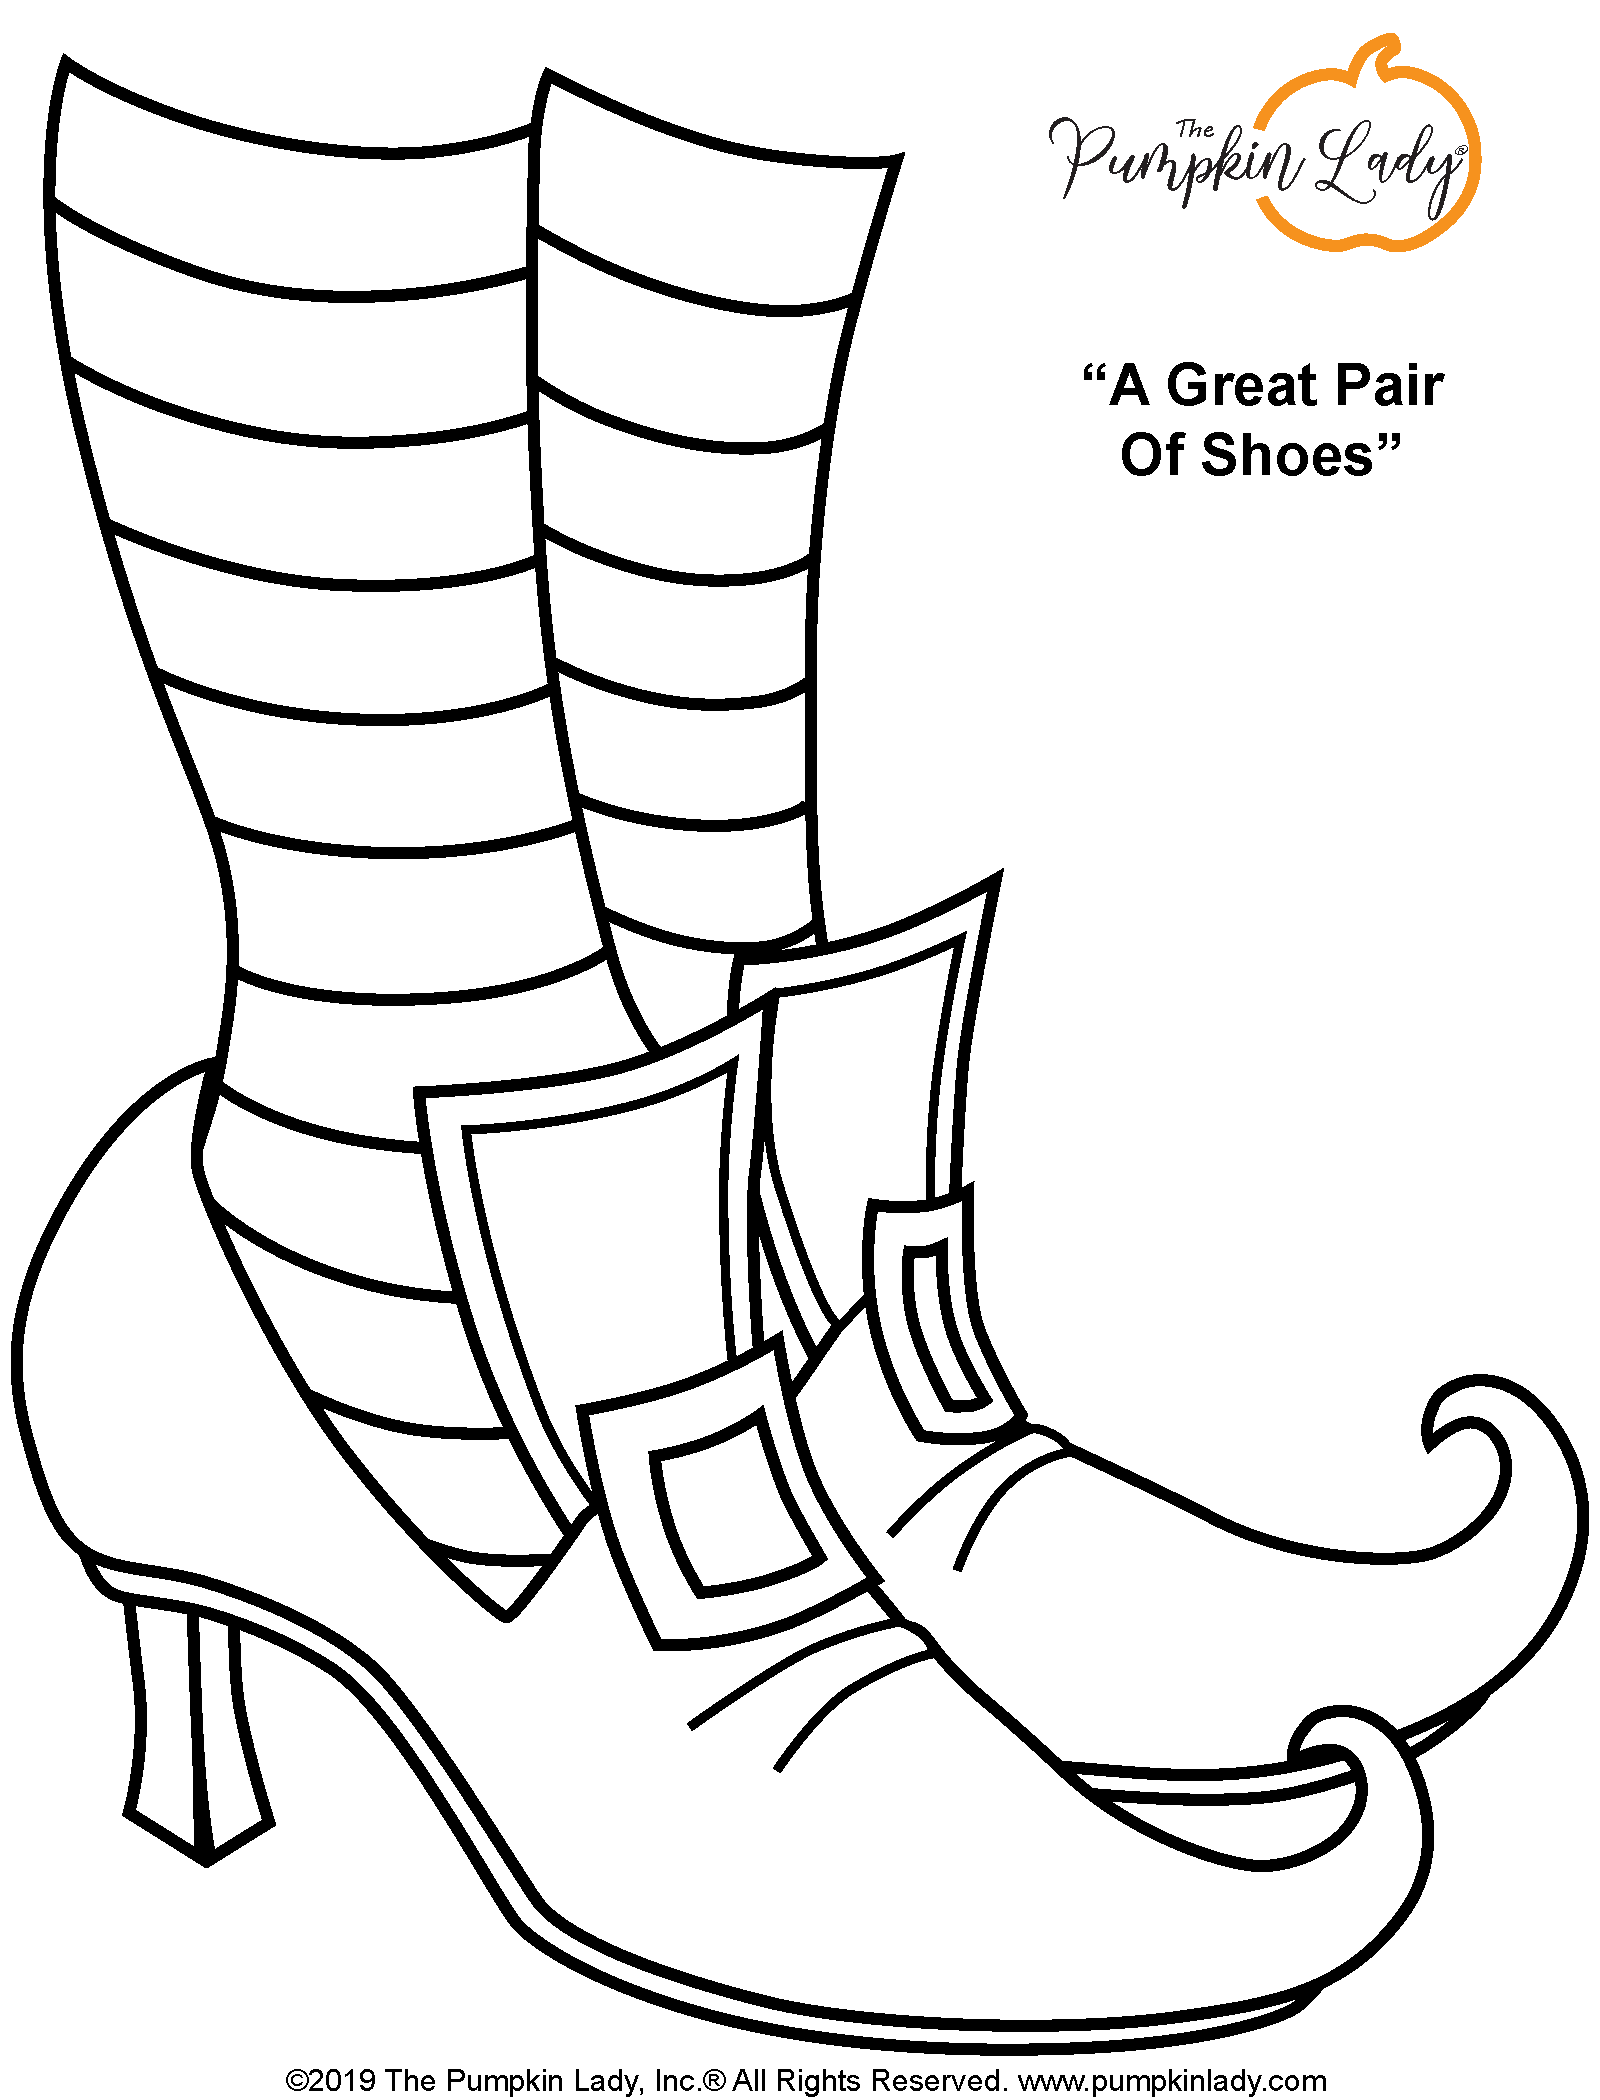 A Great Pair of Shoes Halloween Coloring Page - The Pumpkin Lady